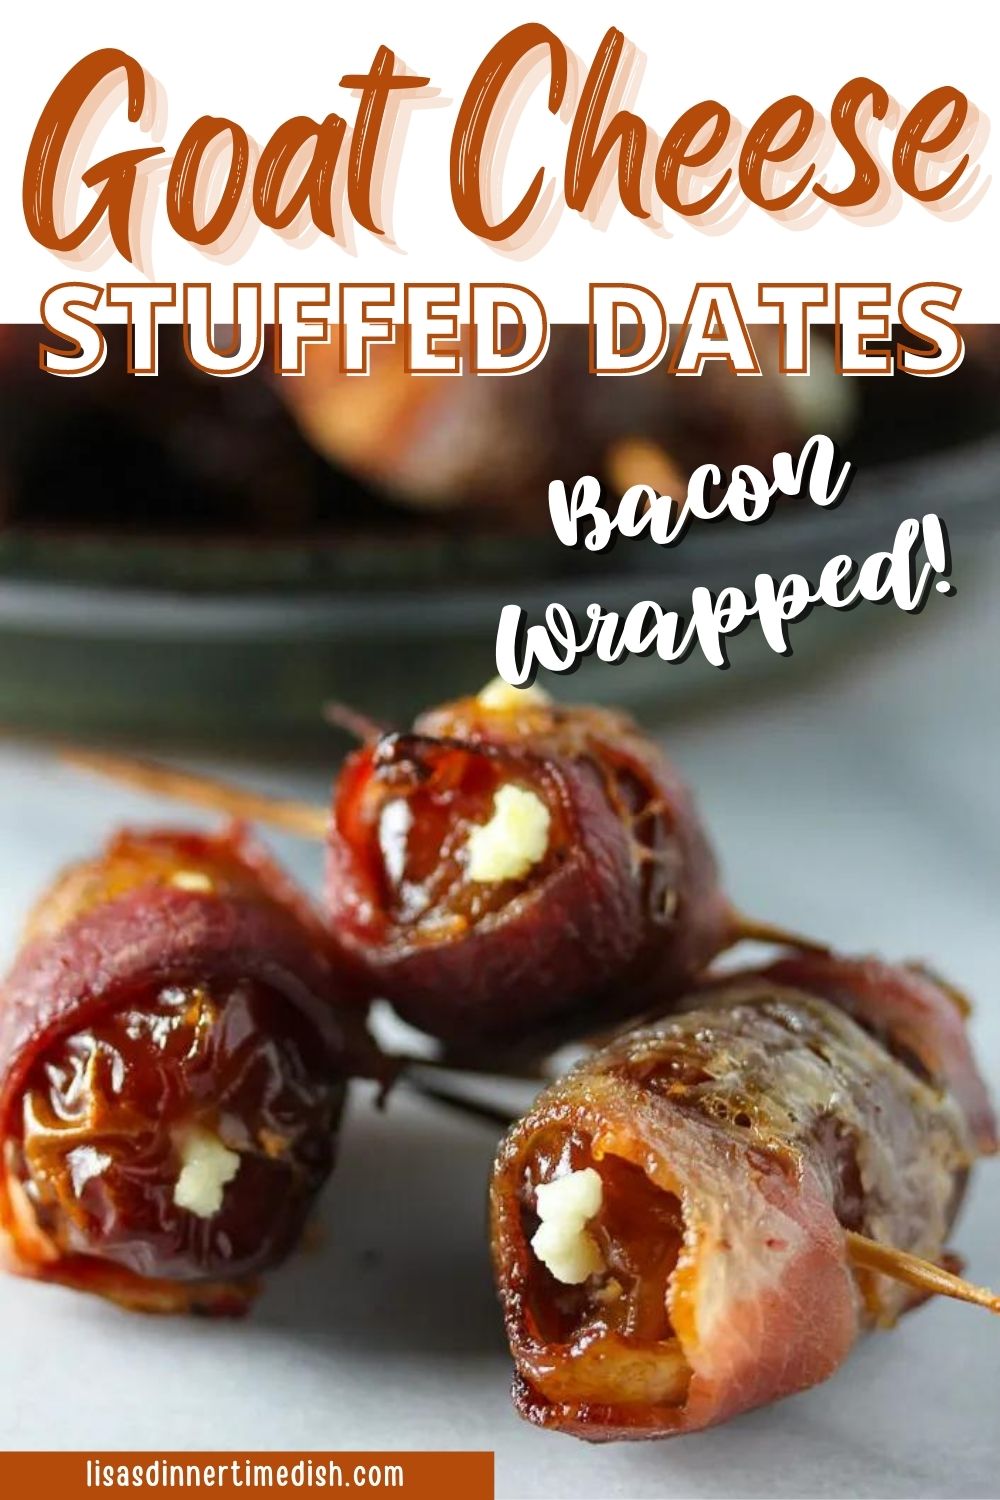 Bacon Wrapped Goat Cheese Stuffed Dates